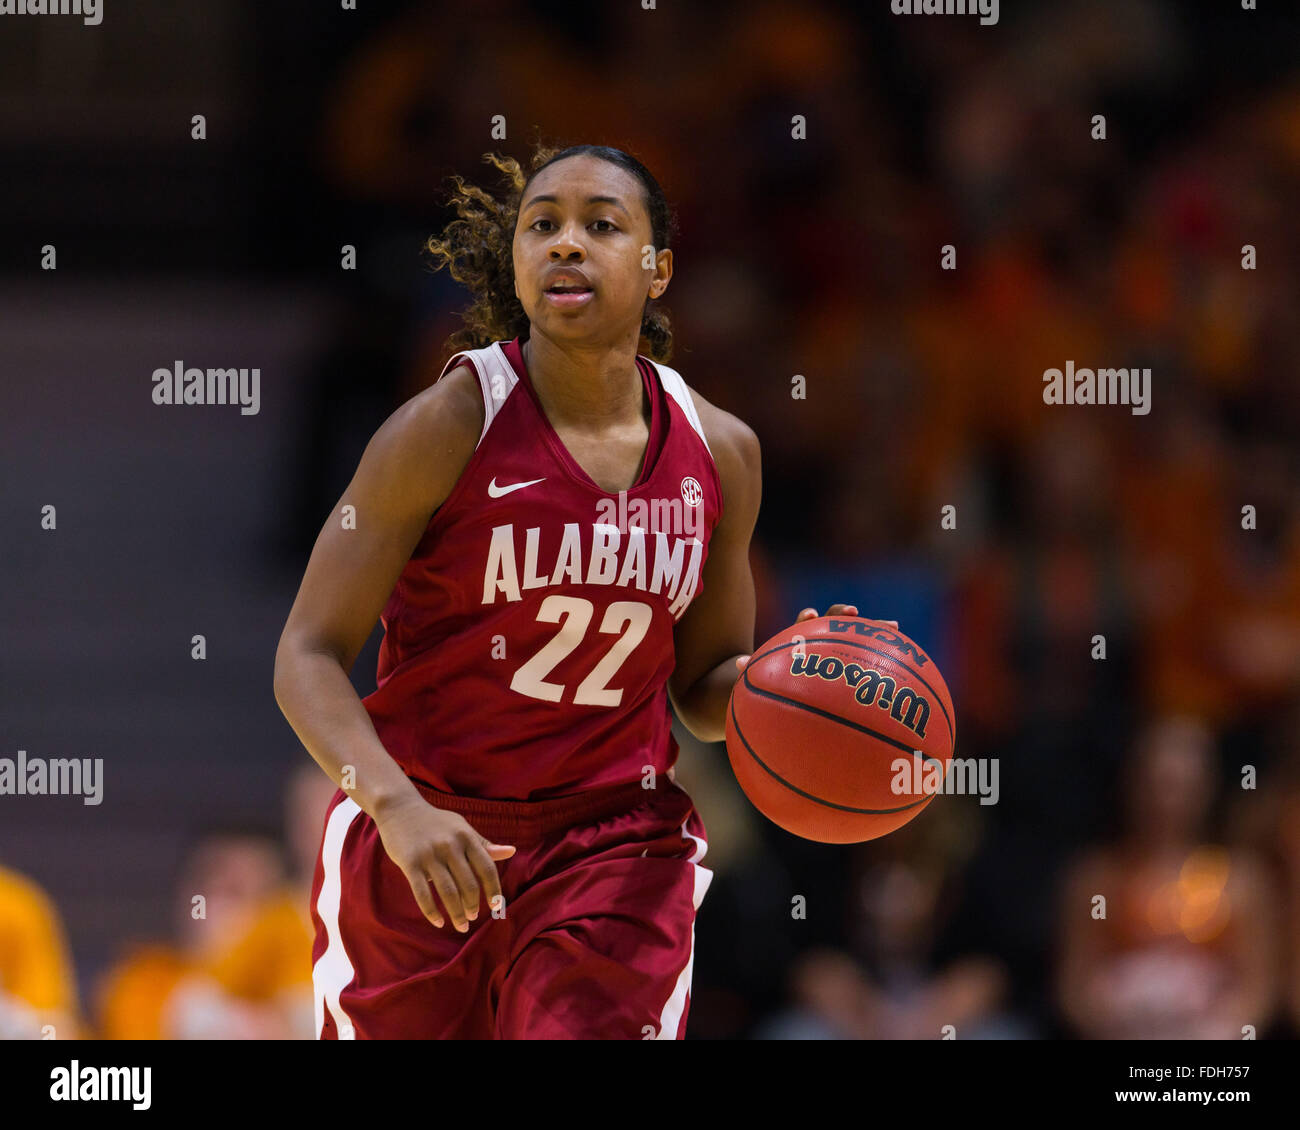 January 31, 2016: Karyla Middlebrook #22 of the Alabama Crimson Tide brings the ball up court during the NCAA basketball game between the University of Tennessee Lady Volunteers and the University of Alabama Crimson Tide at Thompson Boling Arena in Knoxville TN Tim Gangloff/CSM Stock Photo